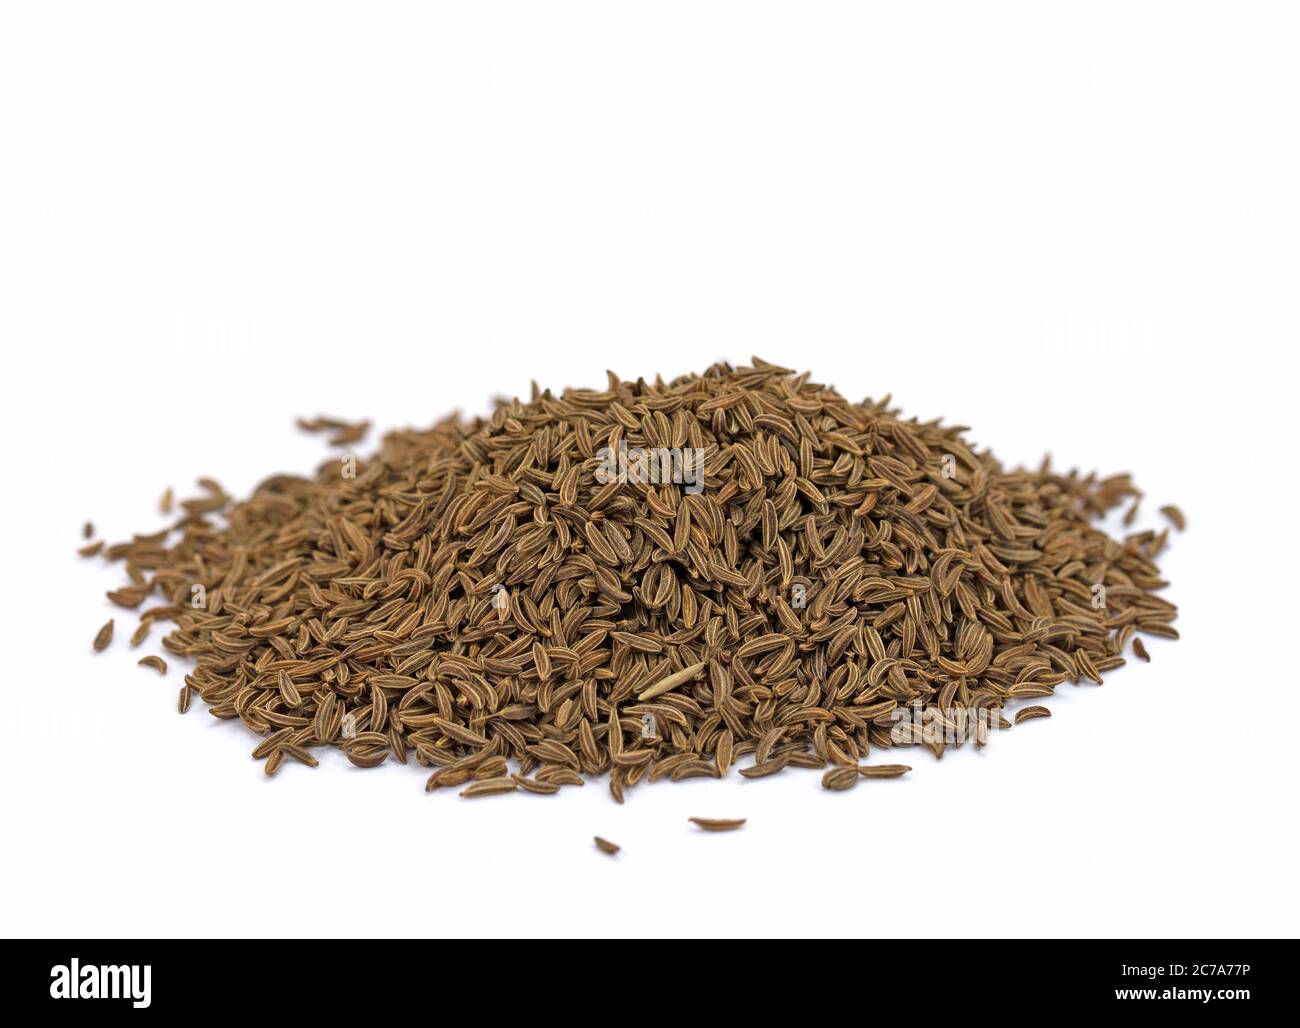 Caraway seeds isolated against a white background Stock Photo